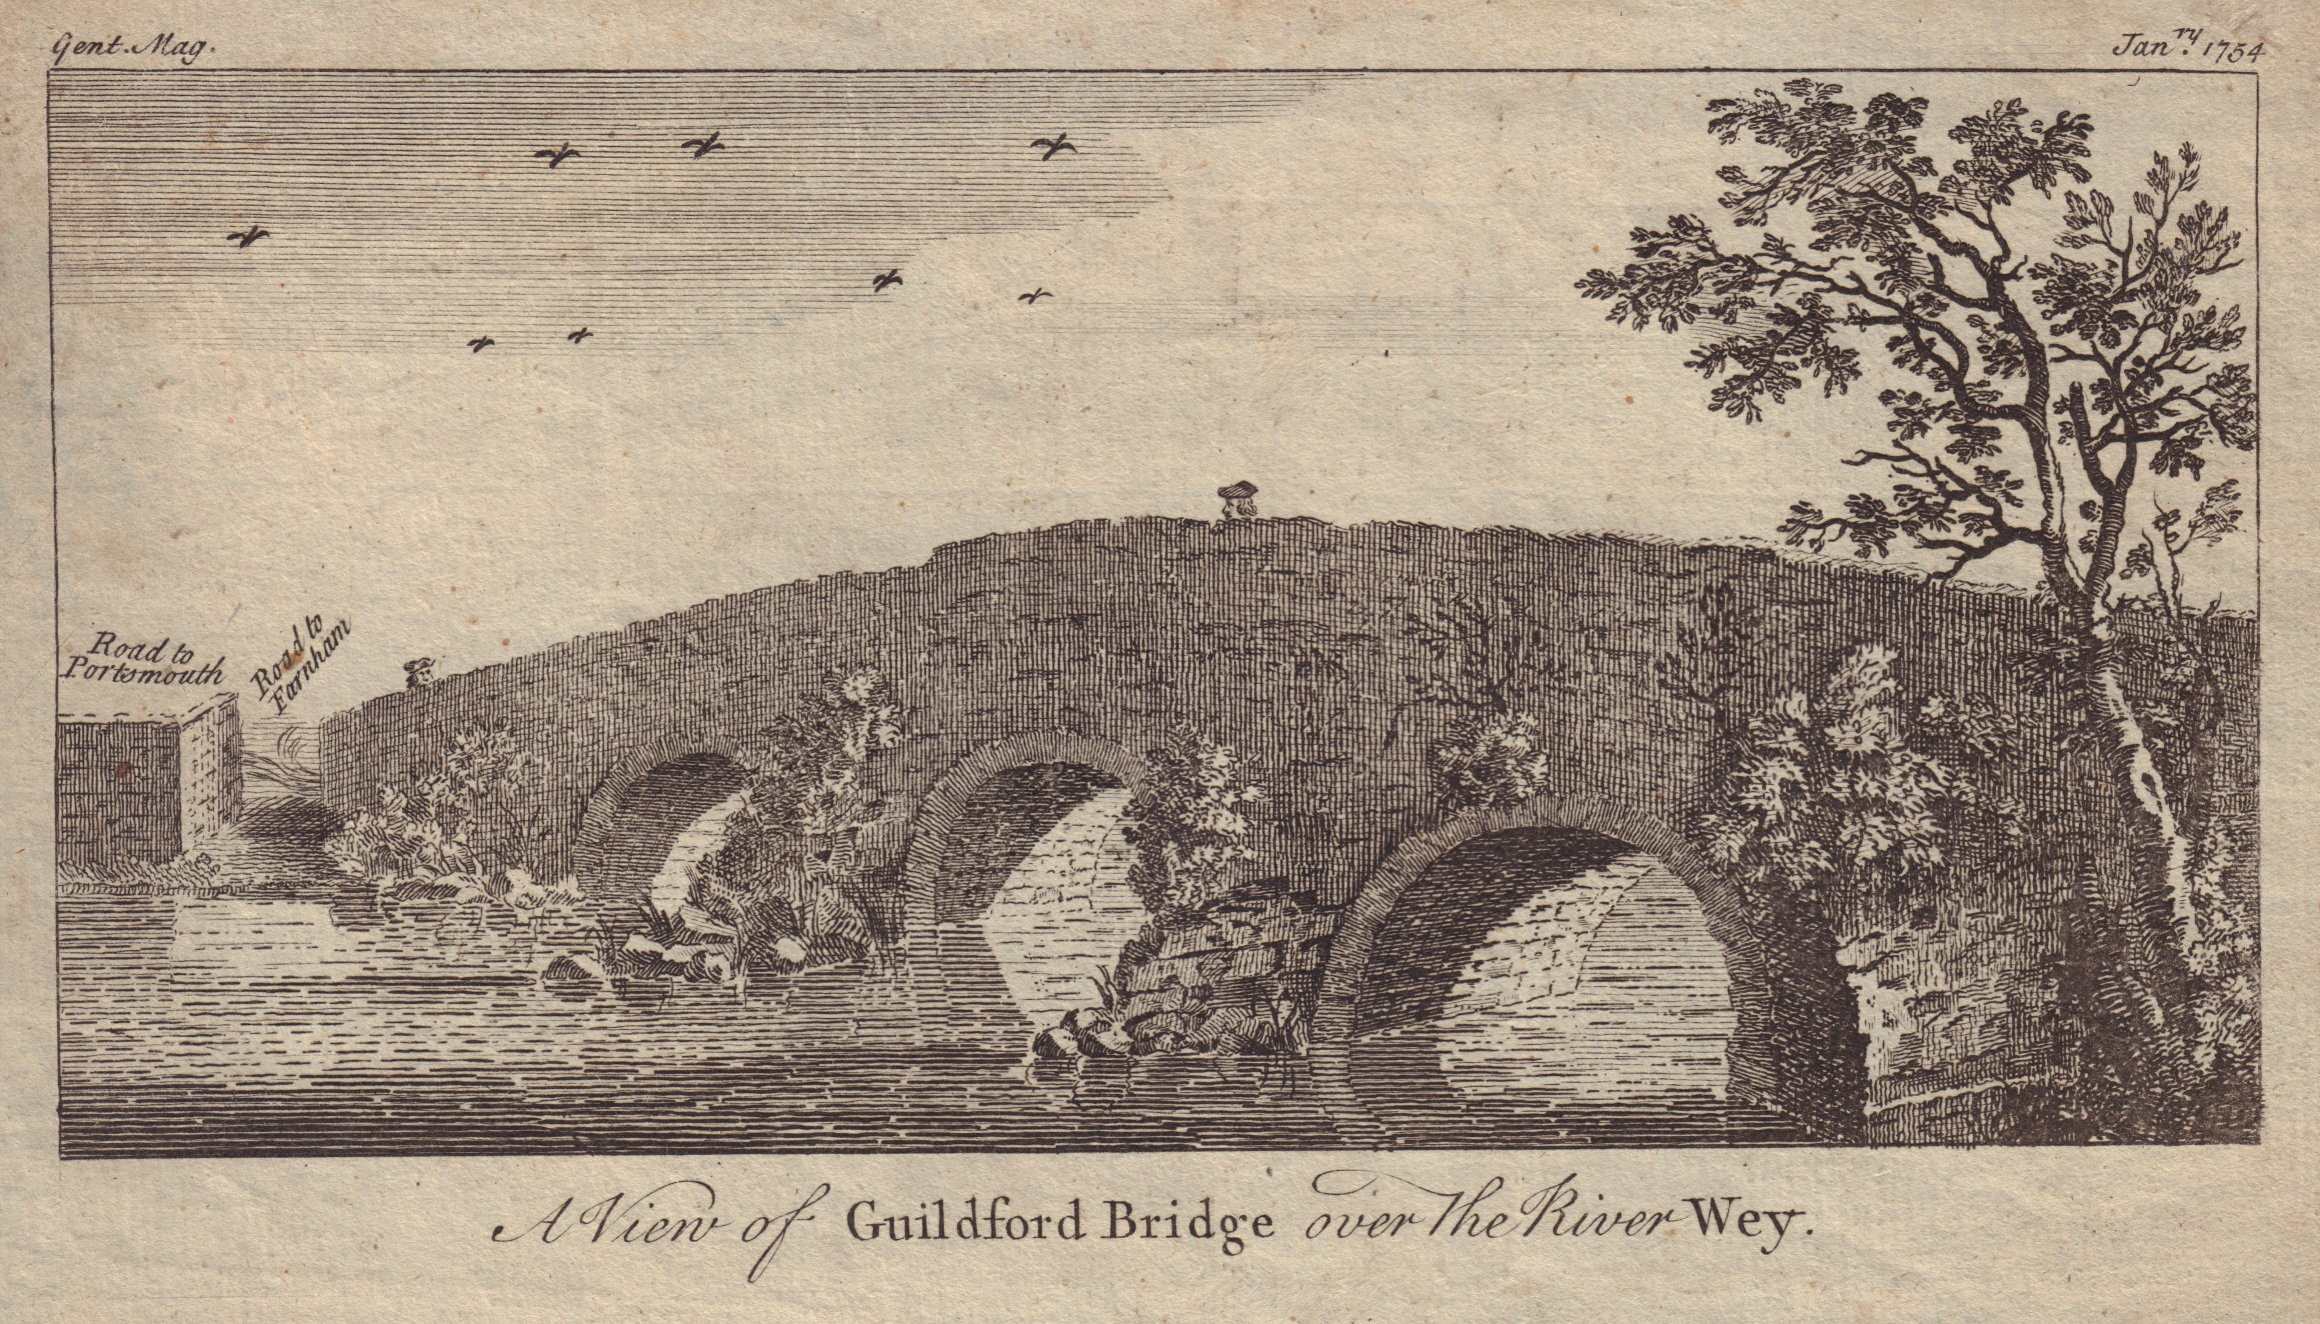 Associate Product A View of Guildford Bridge over the River Wey. Surrey. GENTS MAG 1754 print